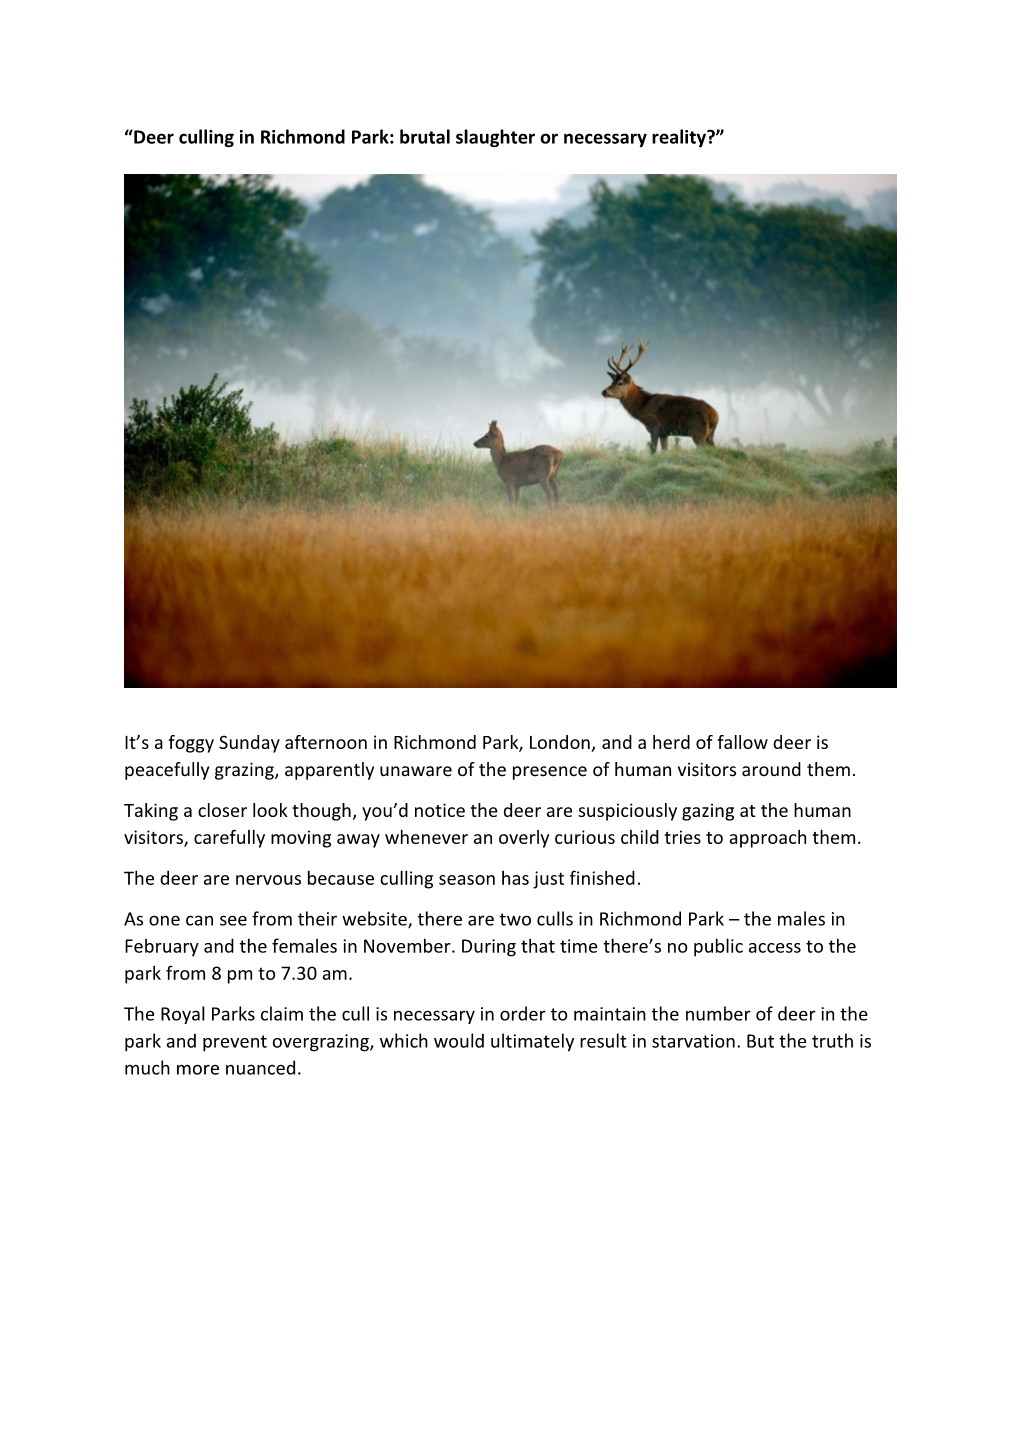 Deer Culling in Richmond Park: Brutal Slaughter Or Necessary Reality?”